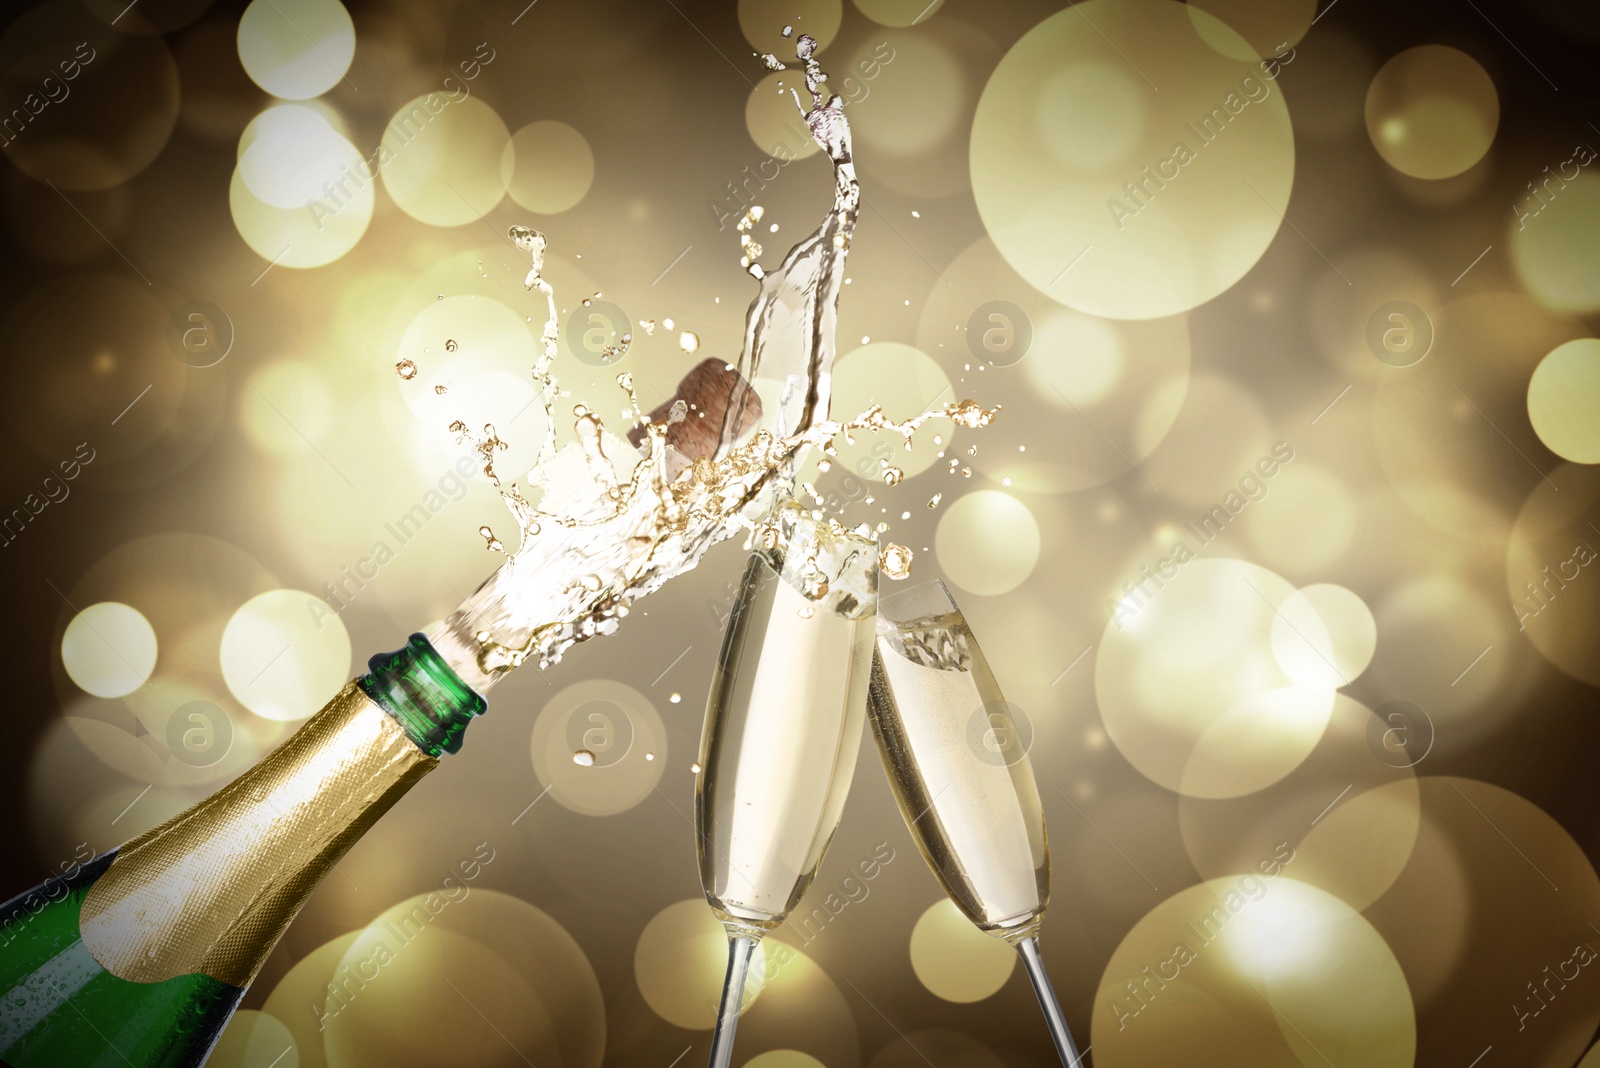 Image of Sparkling wine splashing out of bottle and glasses on color background, bokeh effect